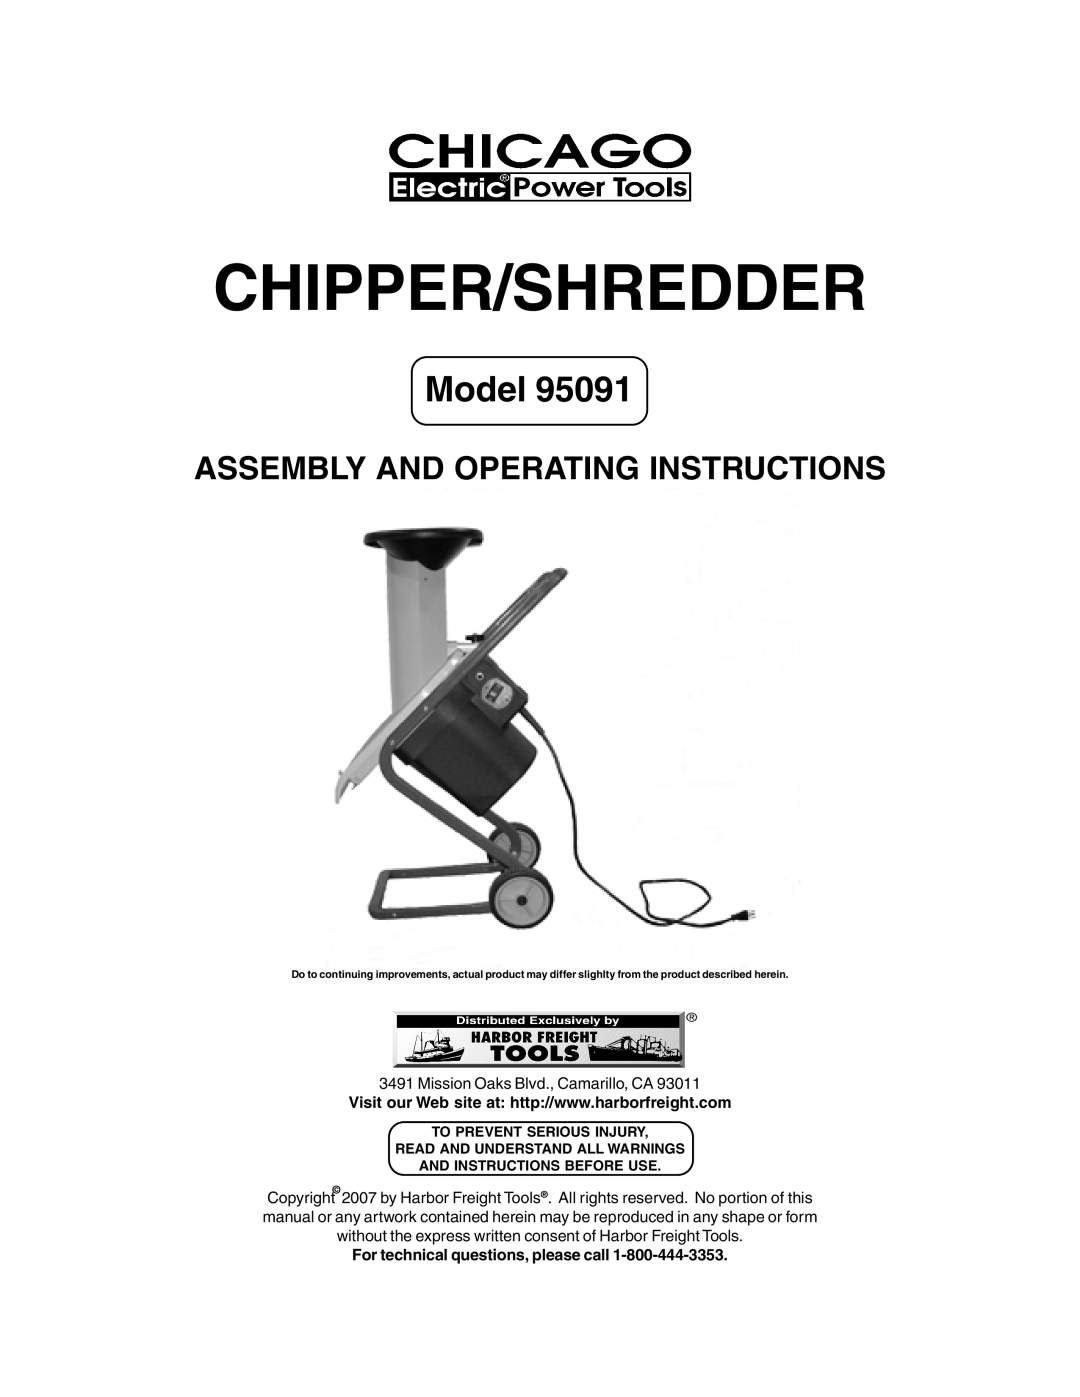 Harbor Freight Tools 95091 manual Chipper/Shredder, Model, Assembly And Operating Instructions 